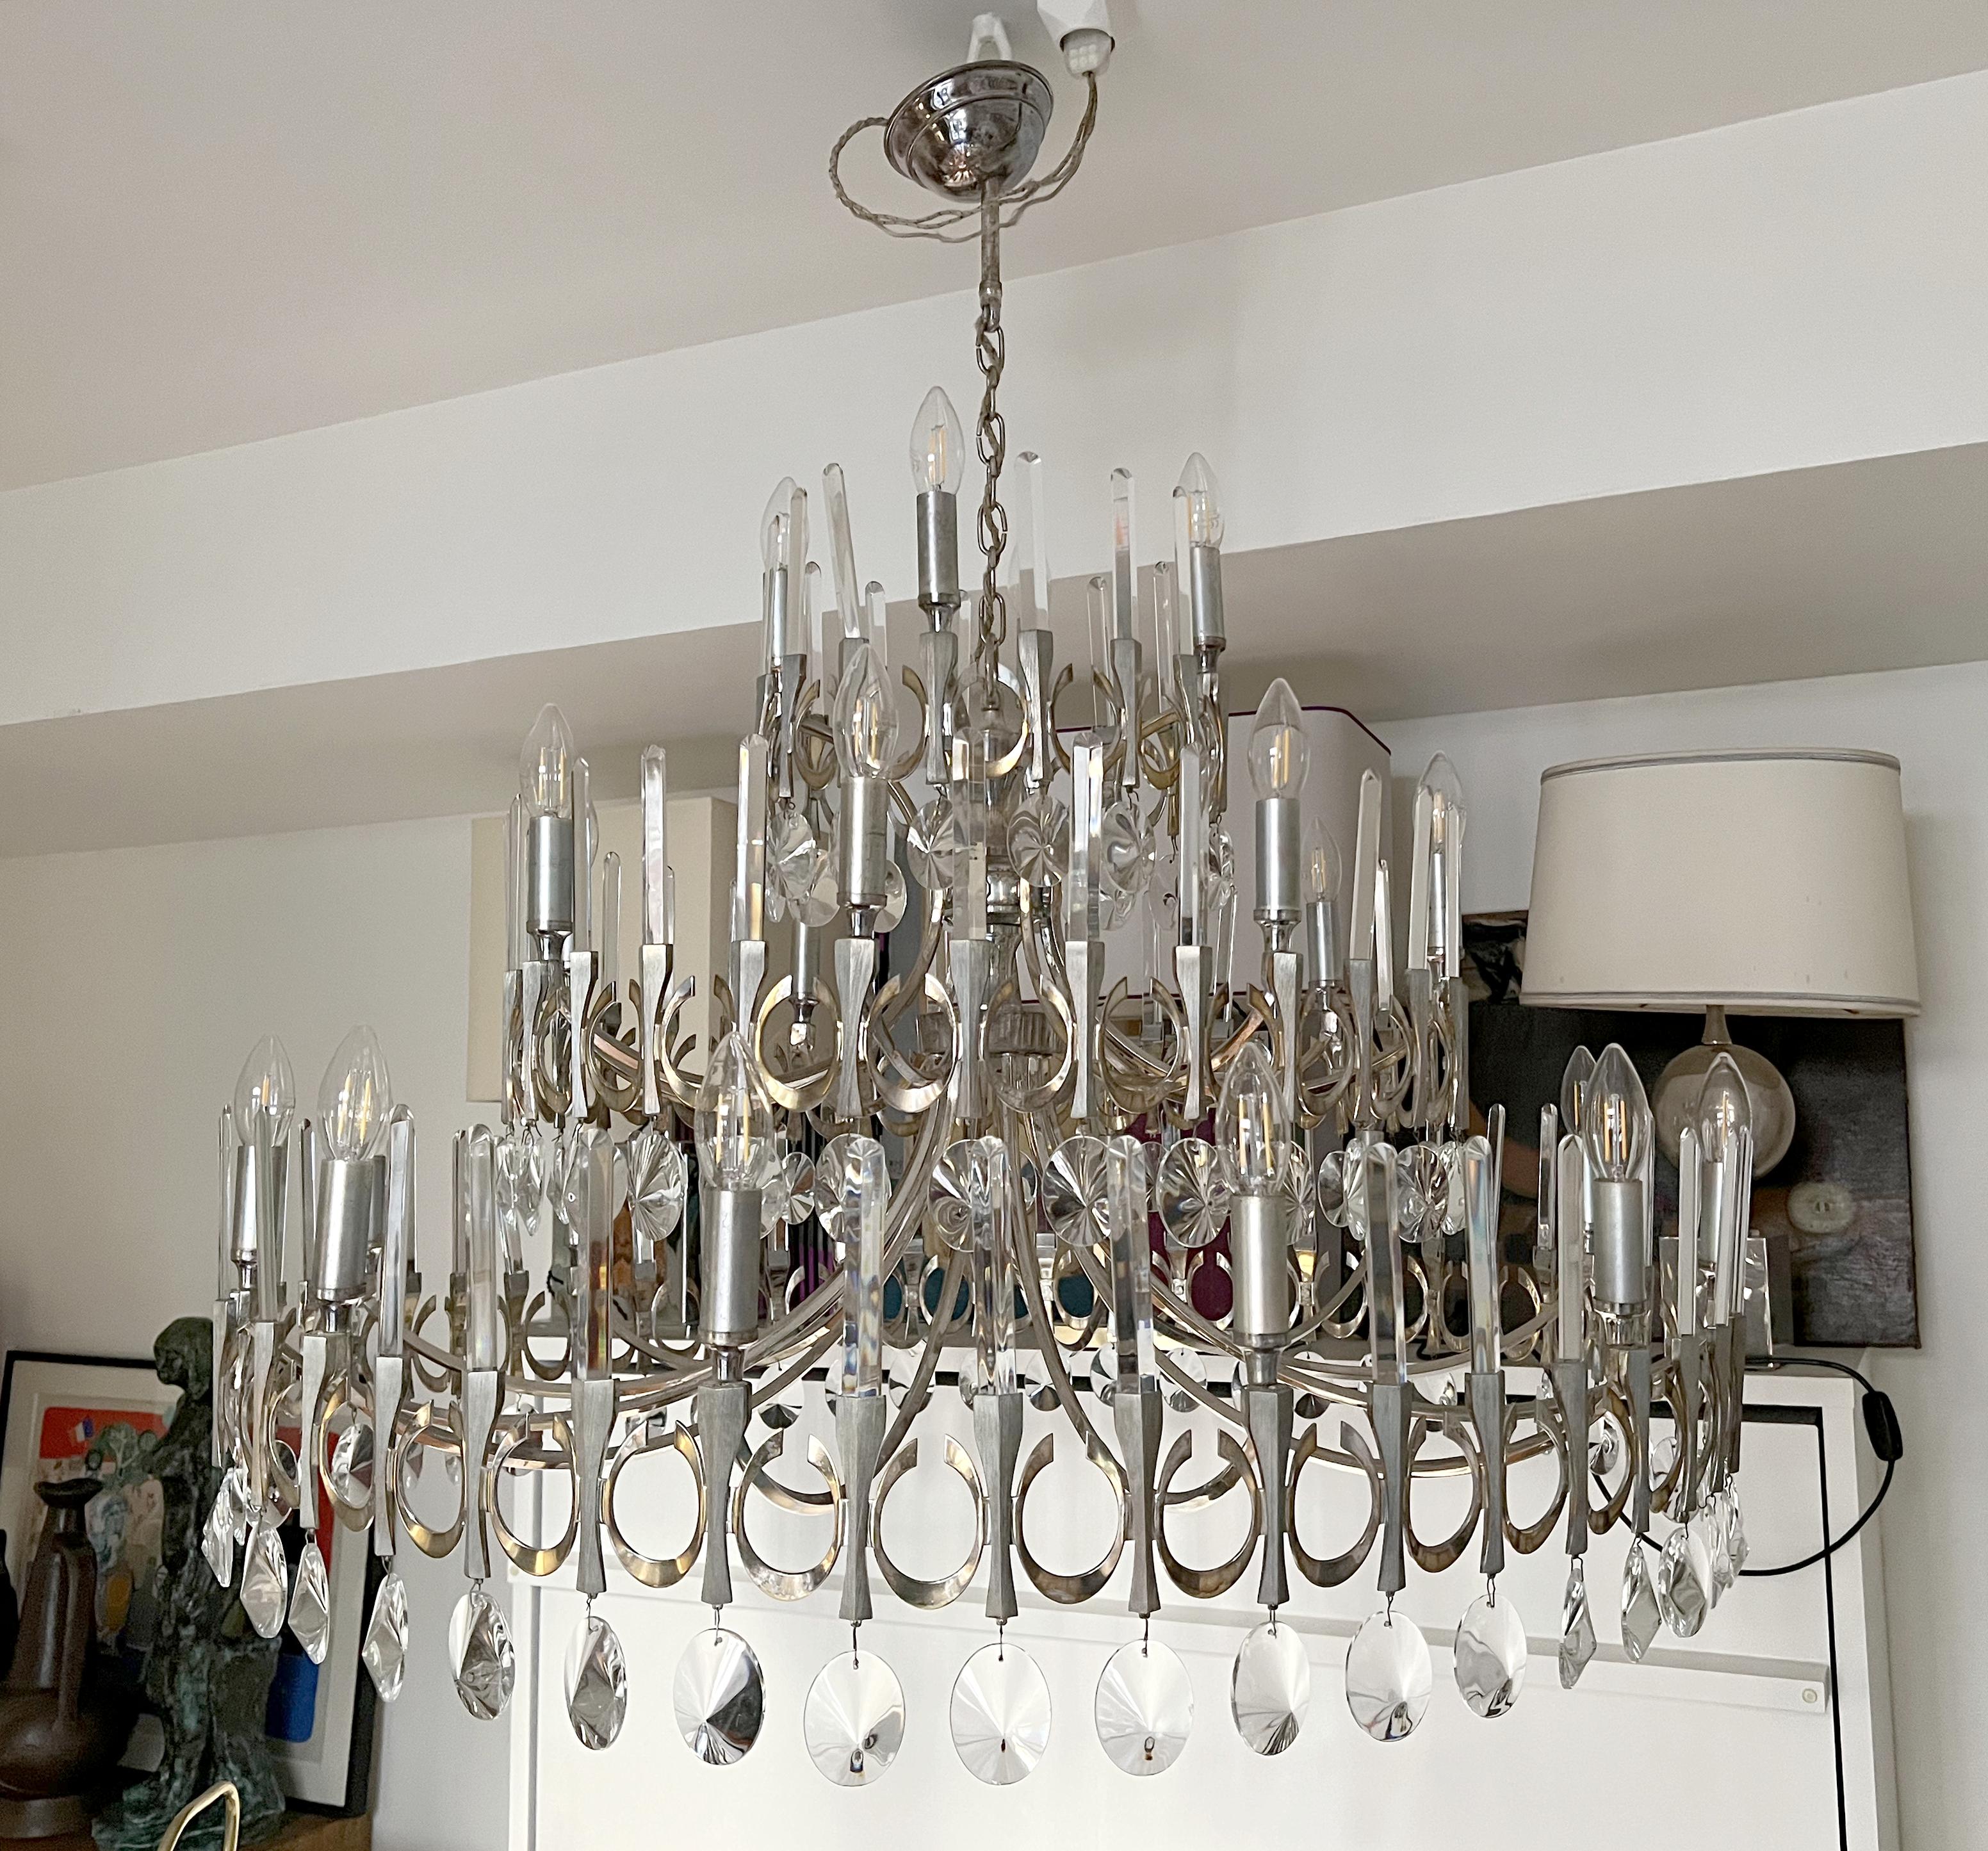 Three stage chandelier from the 